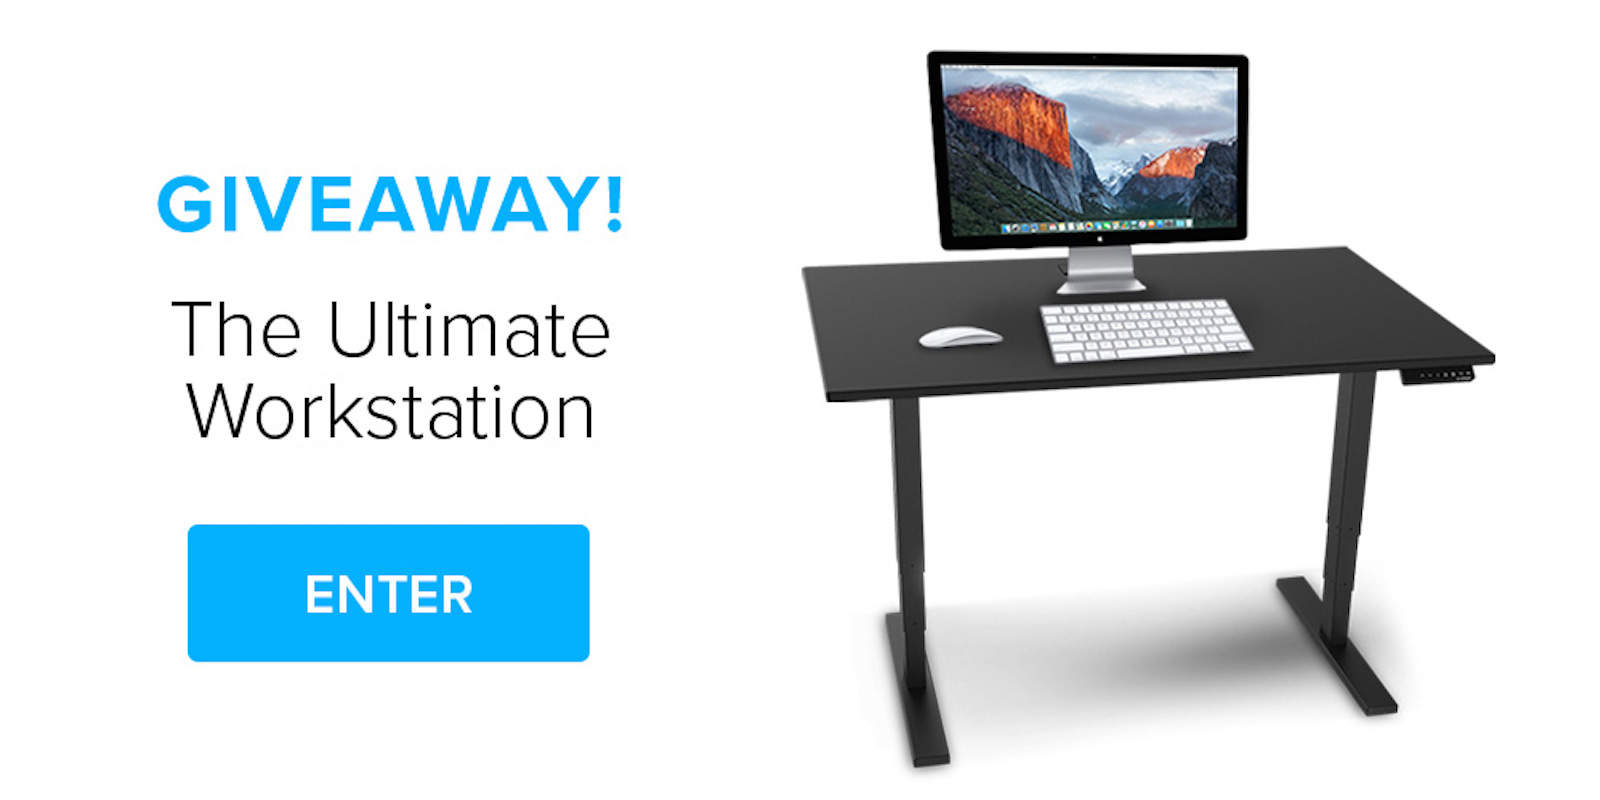 Enter to win a free standing desk with an Apple Thunderbolt monitor, wireless keyboard and more.